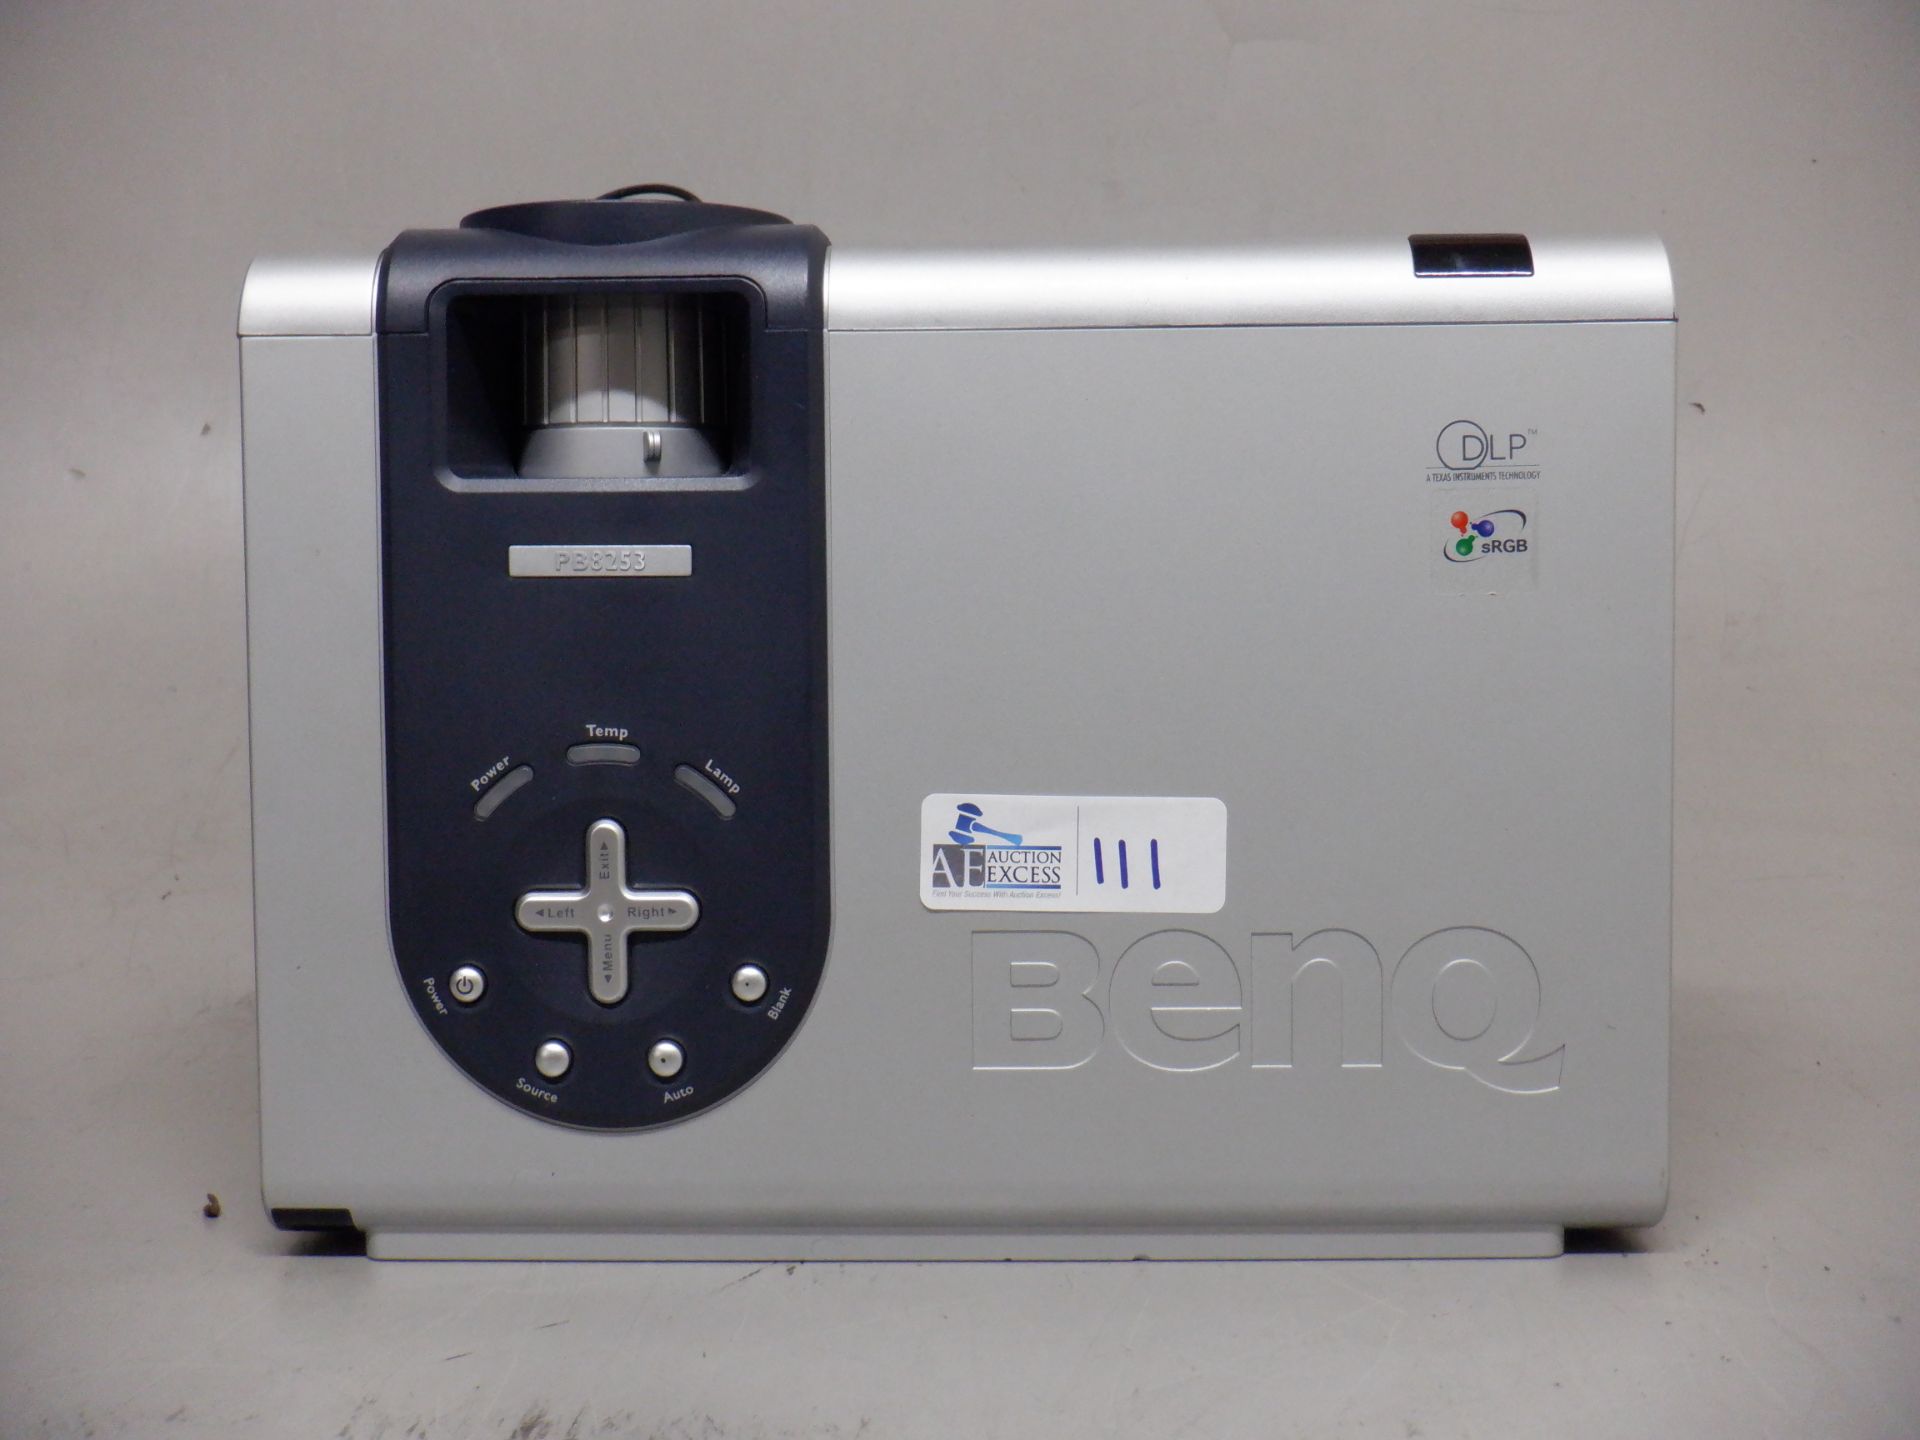 BENO PROJECTOR PB8253 DLP IN CASE - Image 4 of 5